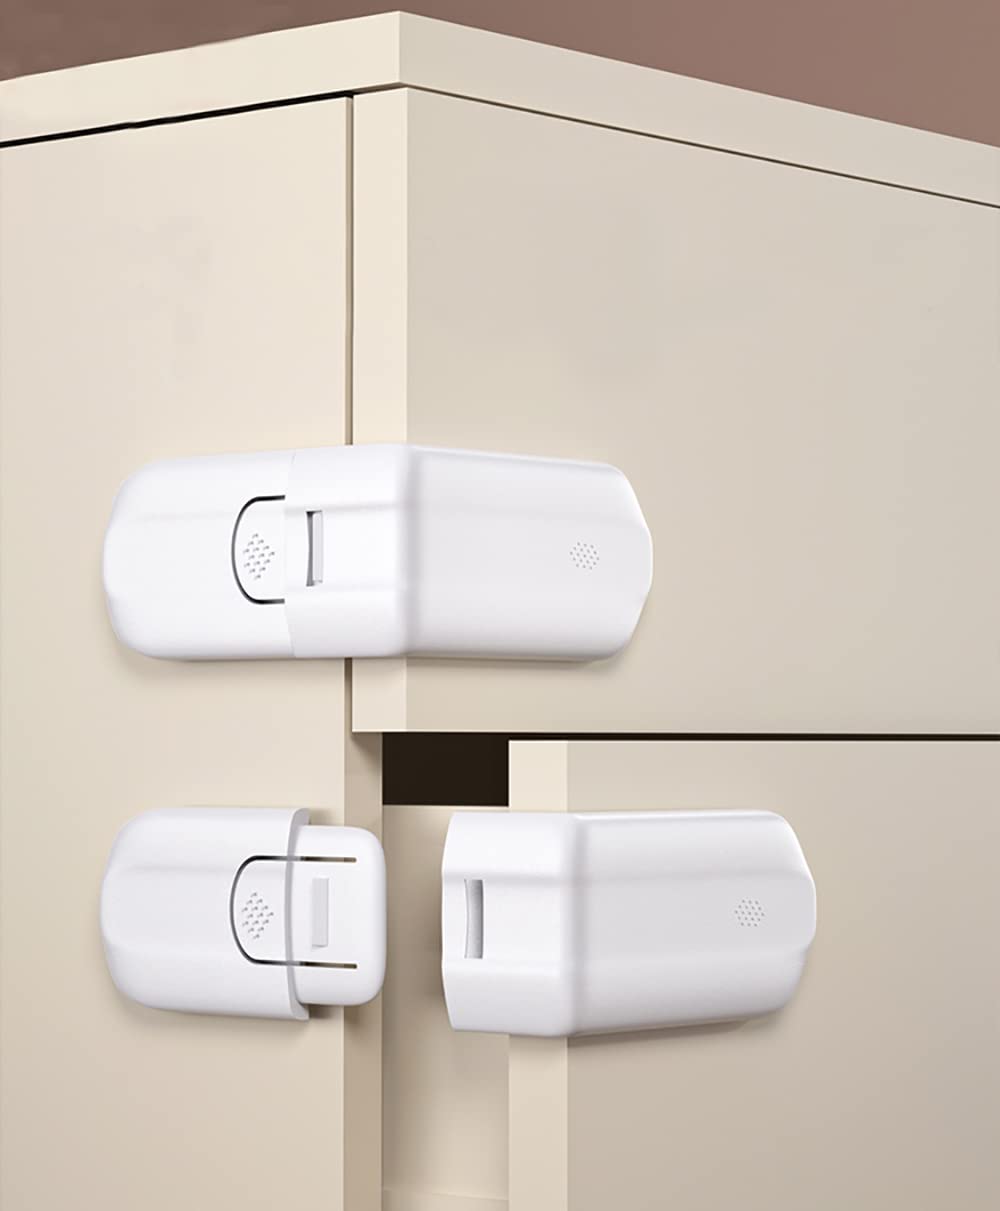 25 X CABINET LOCKS FOR CORNER, 6 PACK BABY SAFETY HIDDEN LOCK FOR CABINETS AND DRAWERS, EASY INSTALLATION, NO DRILLING REQUIRED - TOTAL RRP £175: LOCATION - RACK C